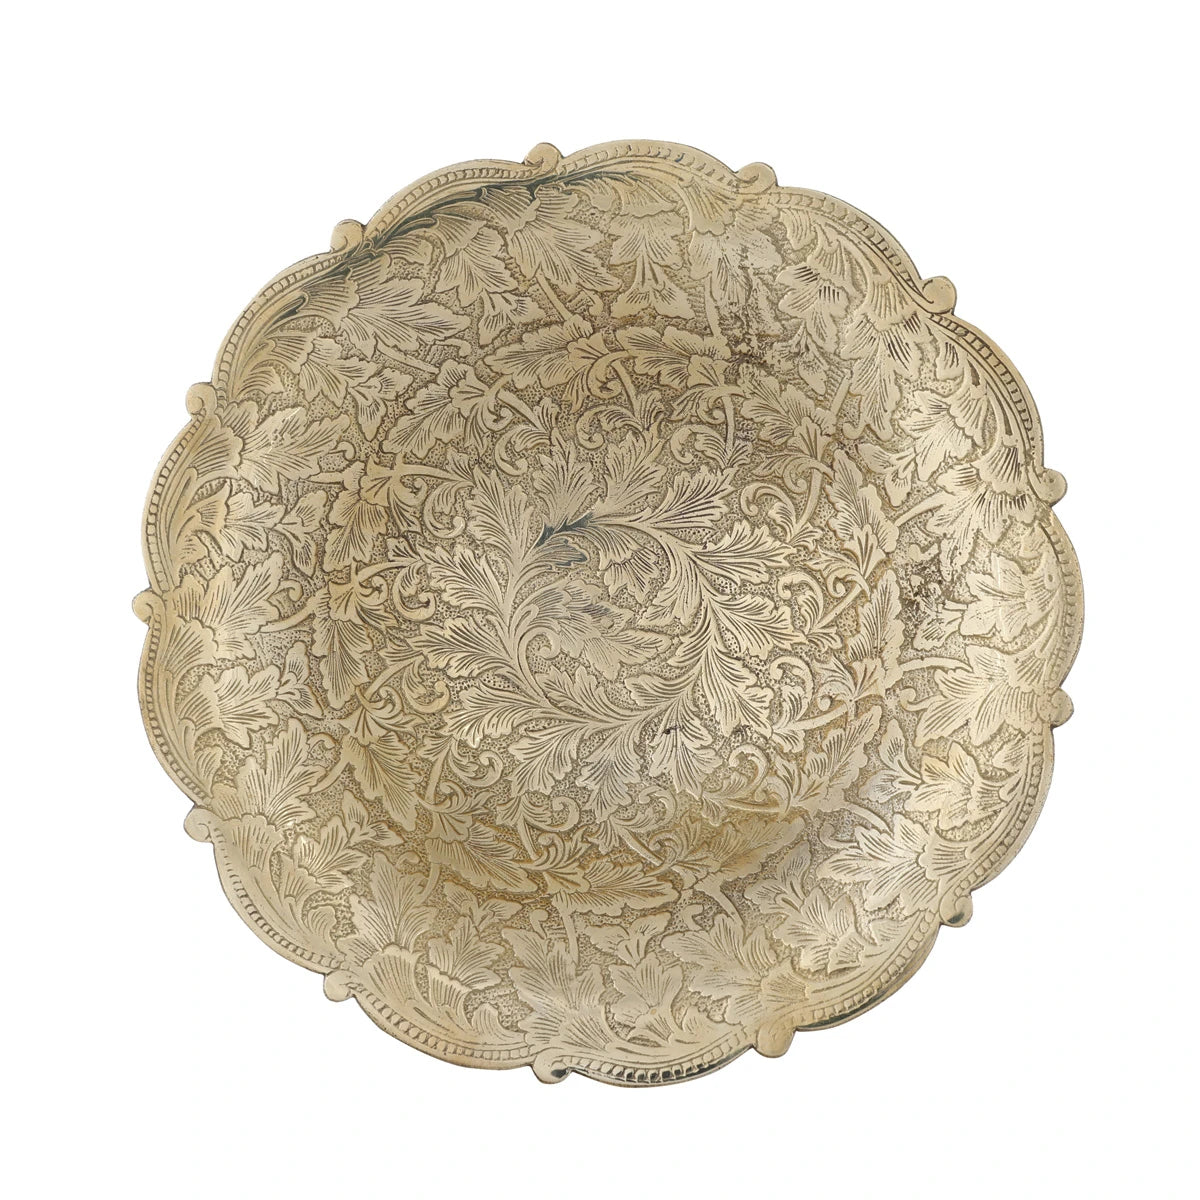 Top View of Three Legged Brass Bowl - Gold Variant